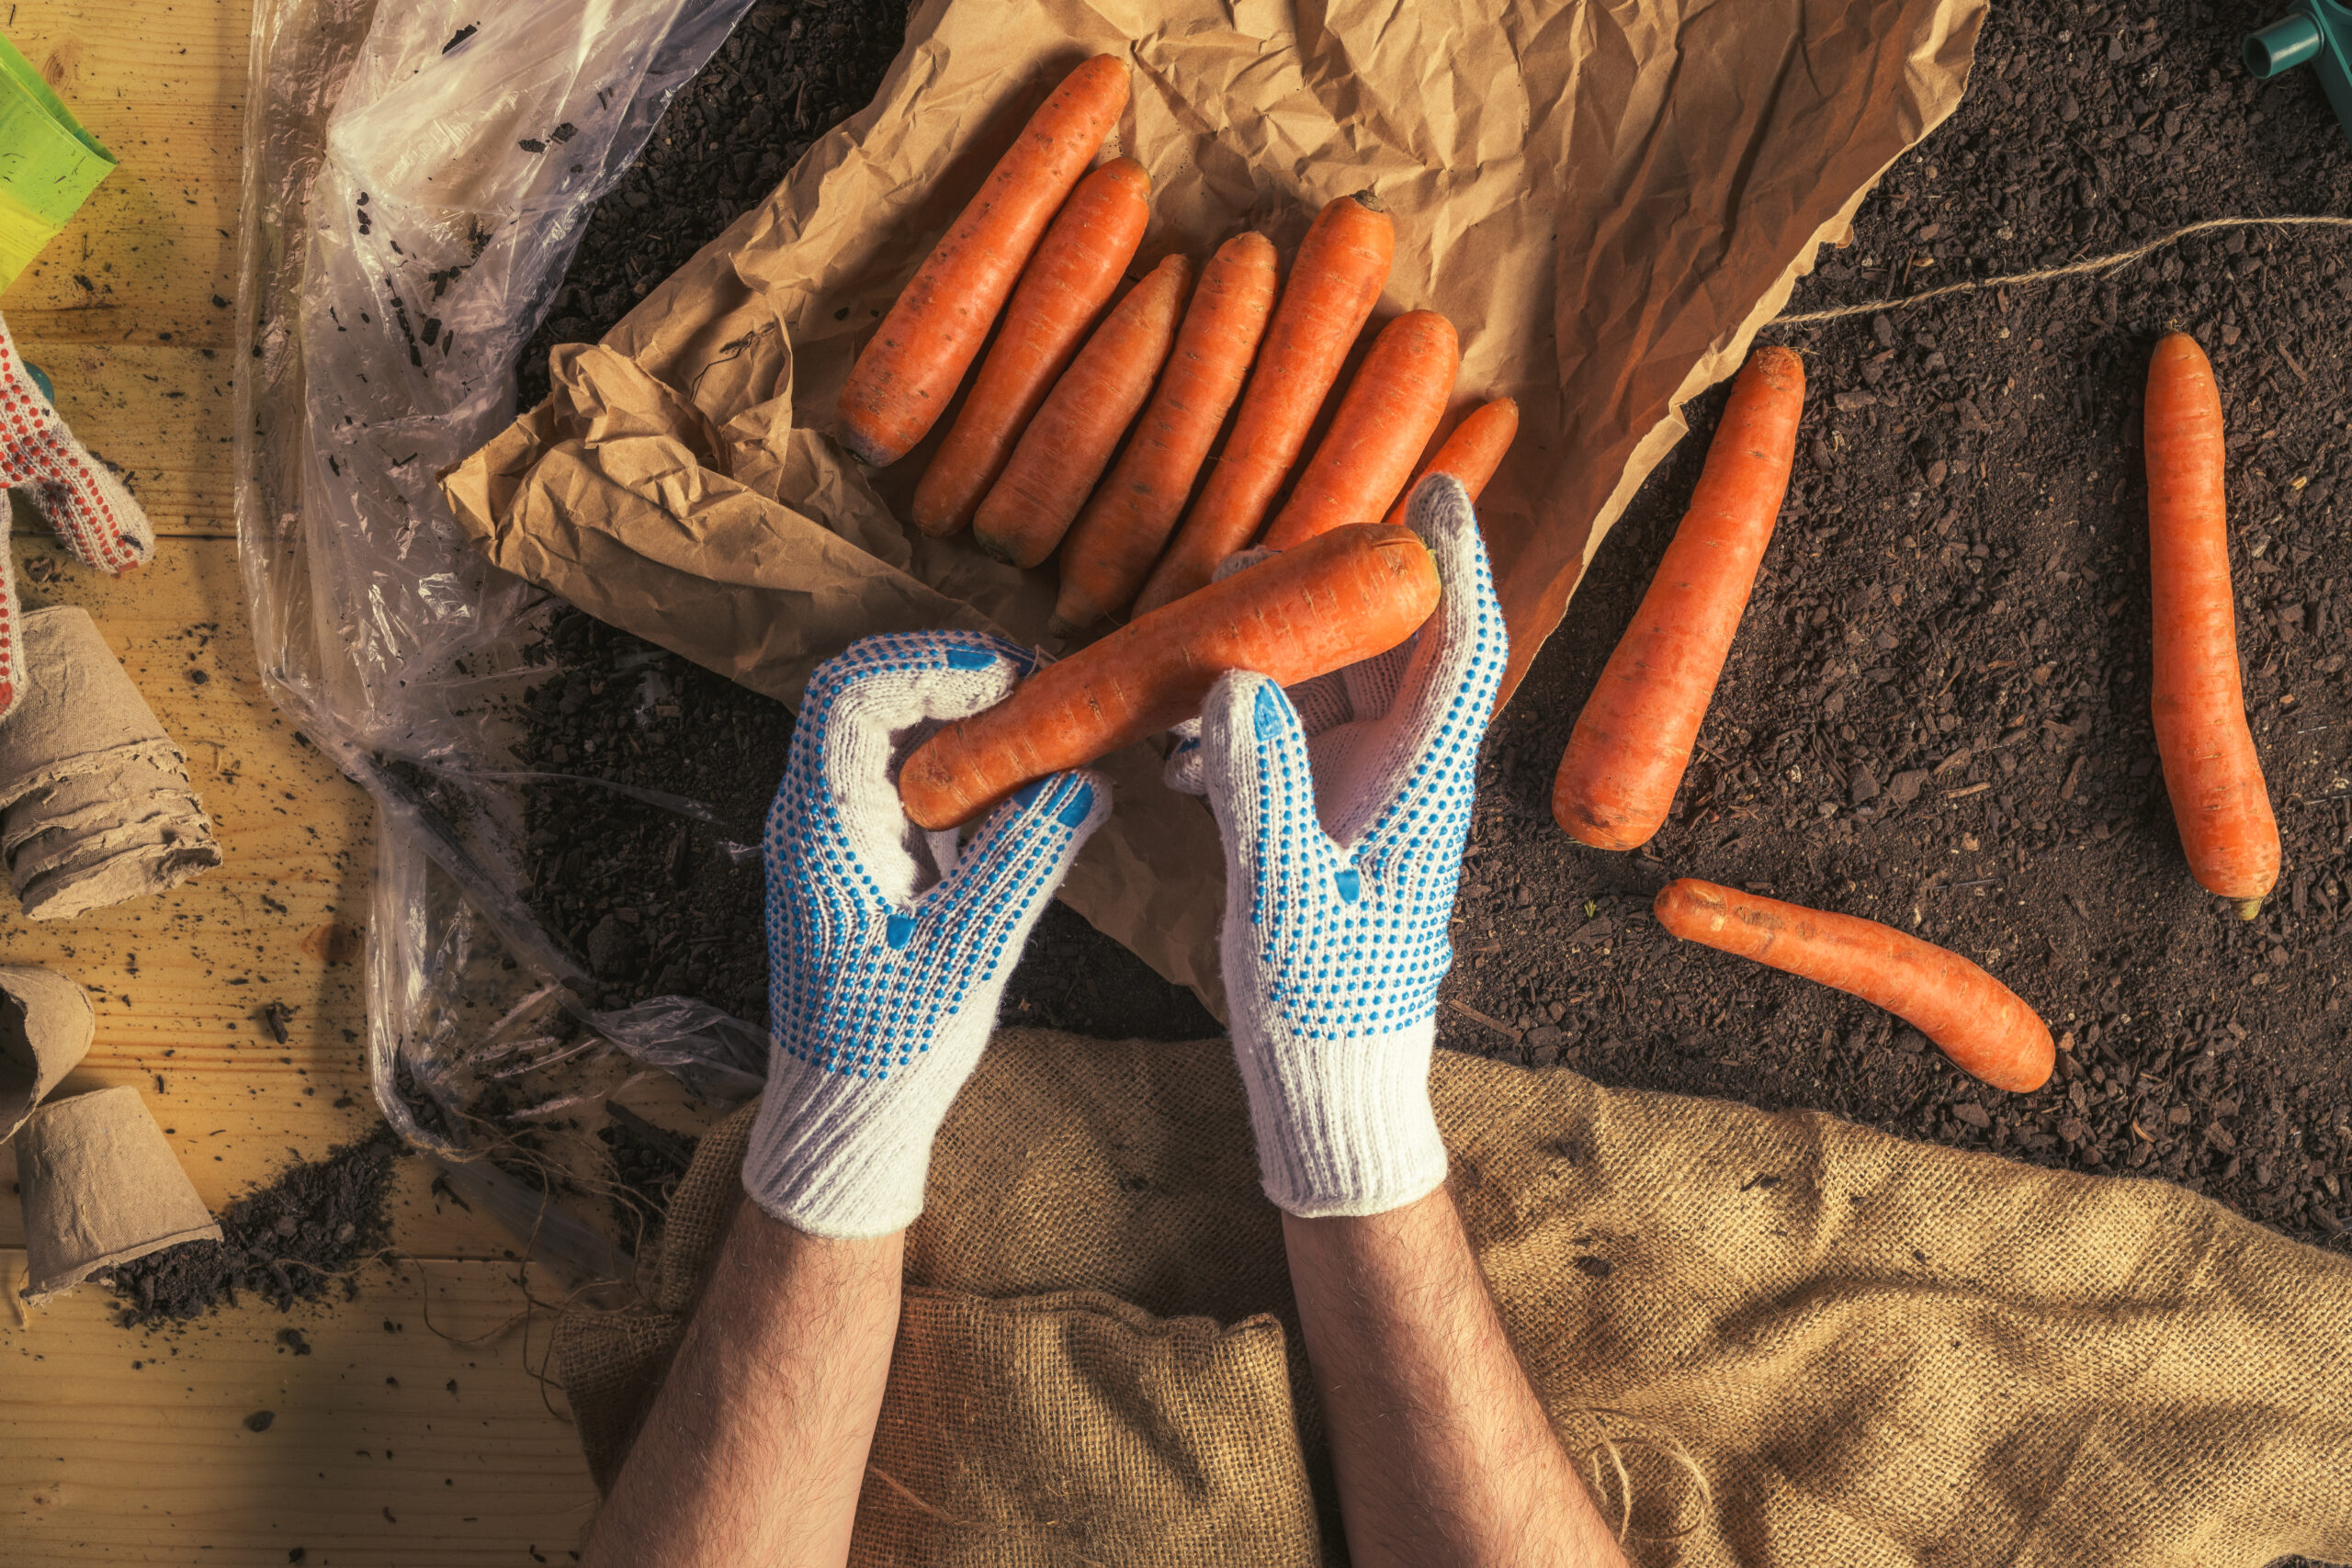 Farmer preparing organic homegrown carrots for farmer's market, top view of hands packing harvested root vegetable